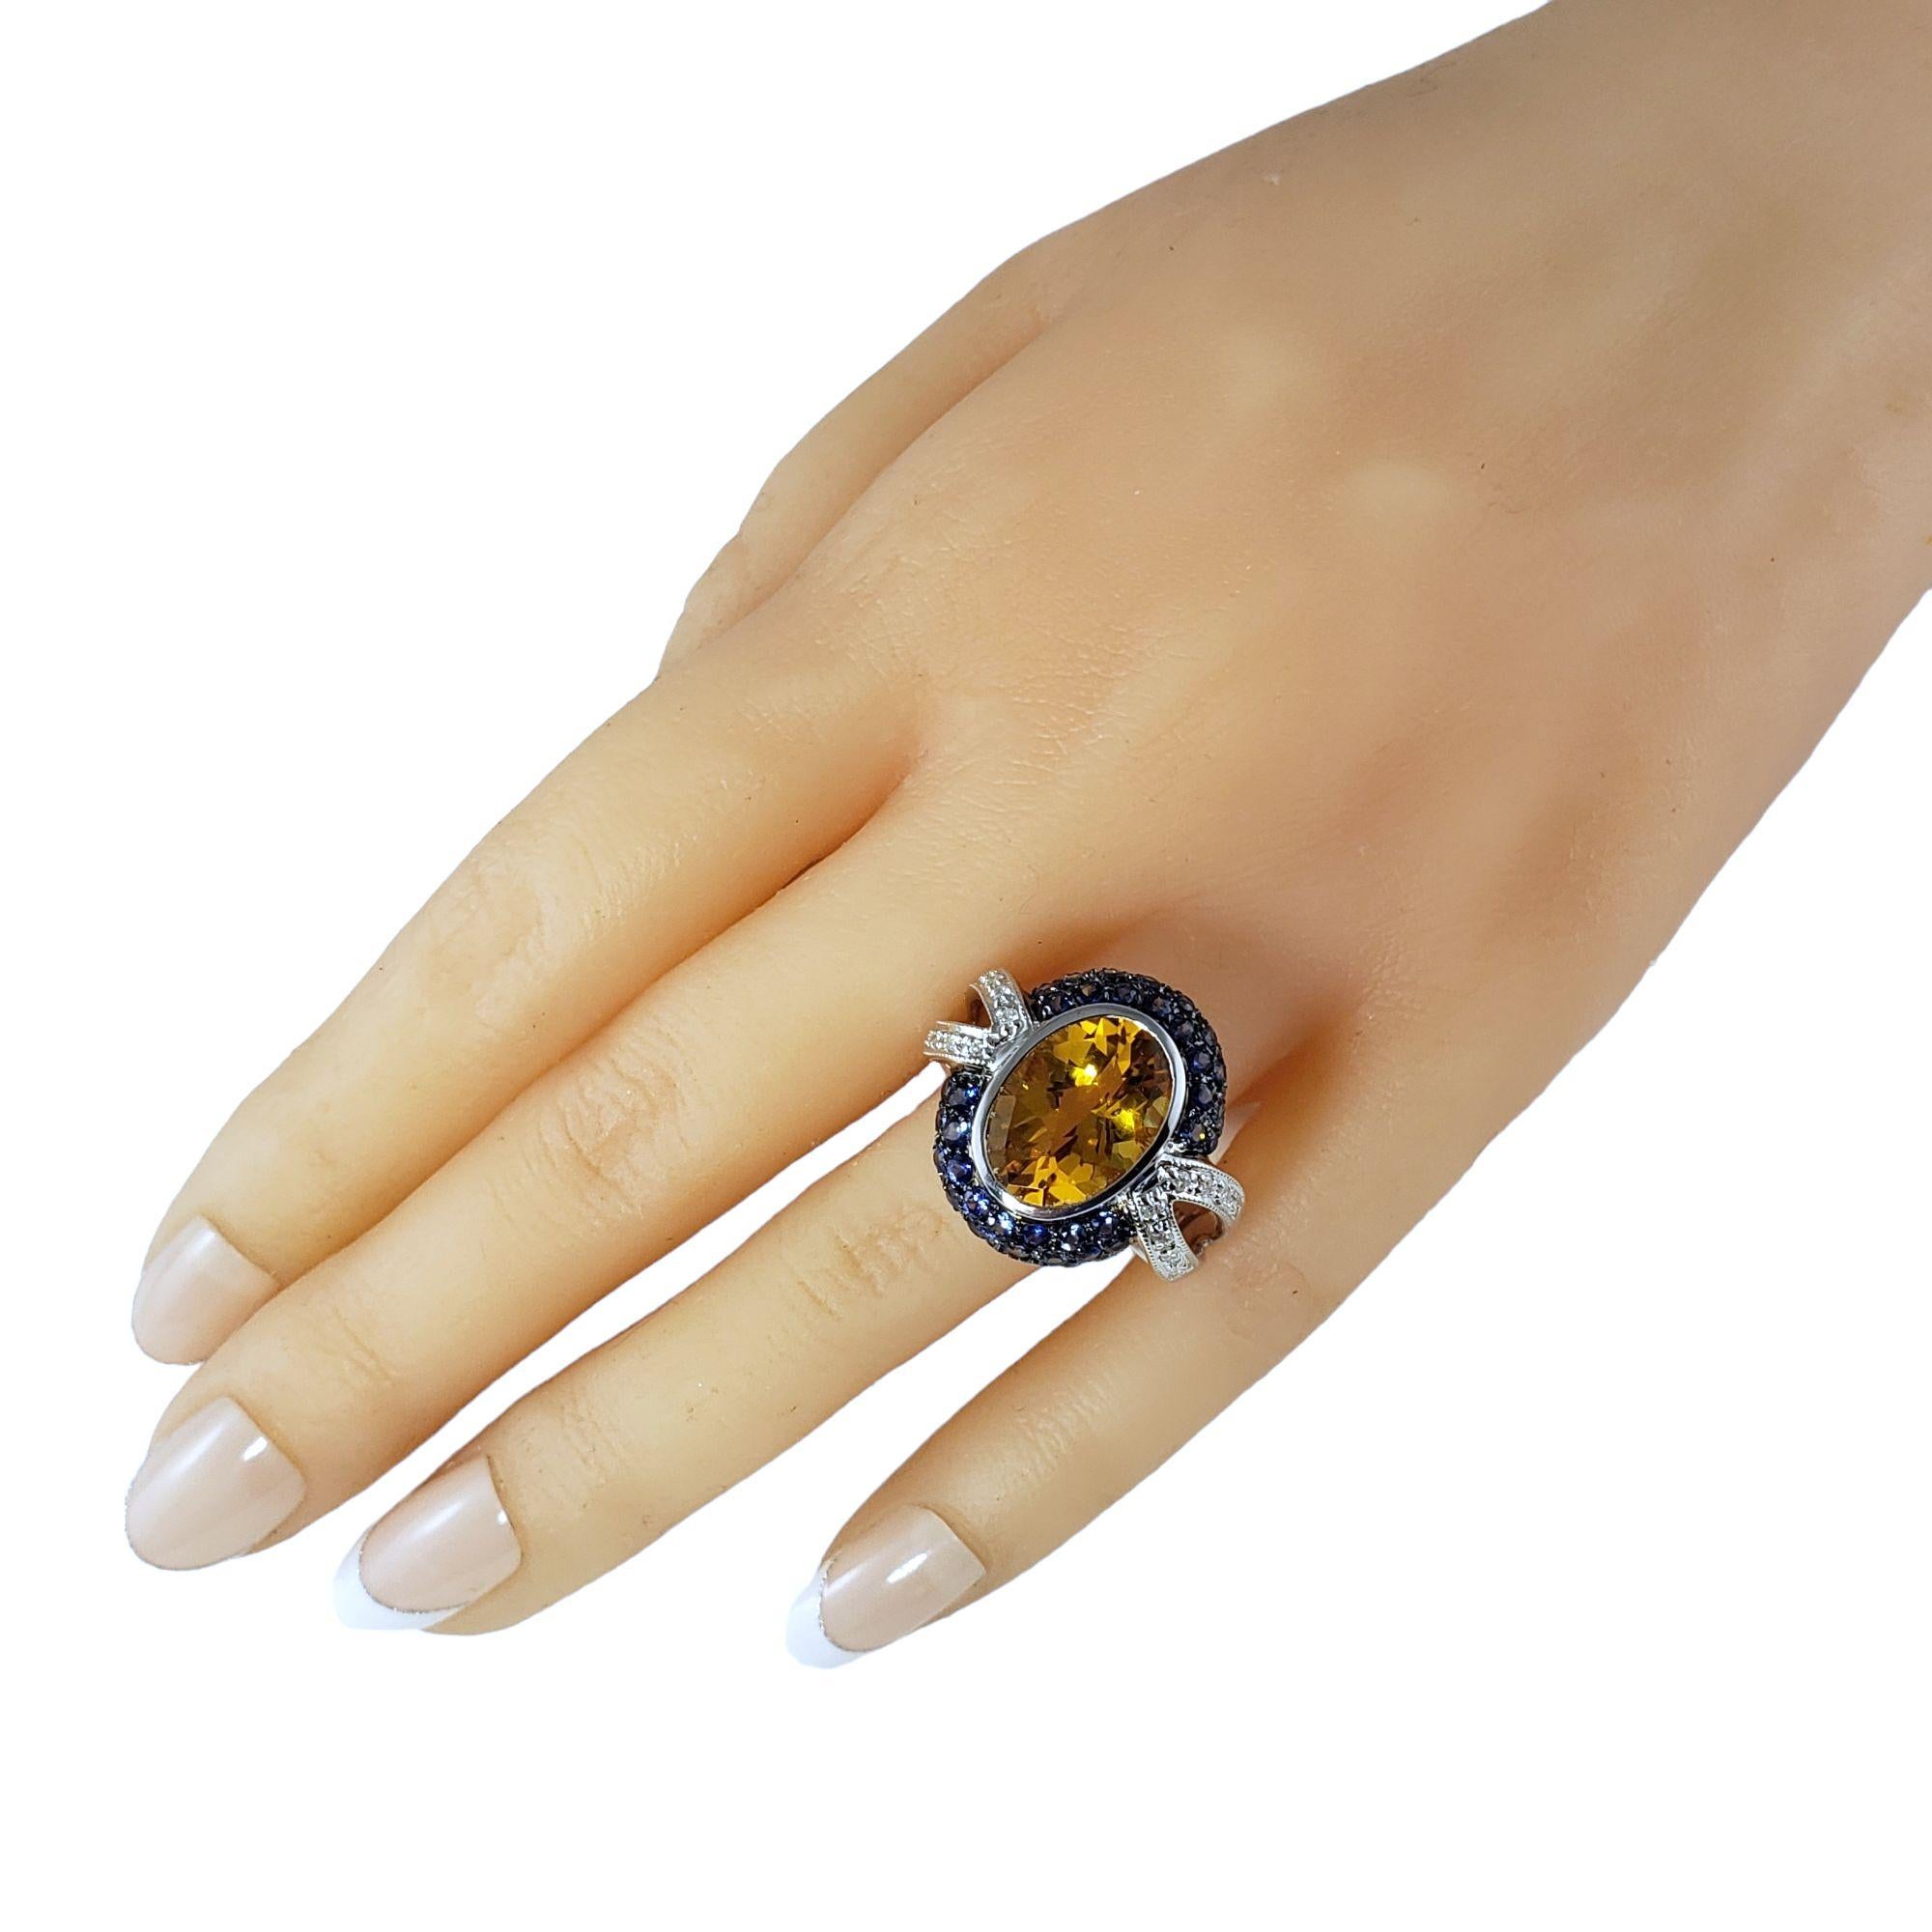 Vintage 14 Karat White Gold Citrine, Diamond and Sapphire Ring Size 10.25 JAGi Certified-

This stunning ring features one oval citrine (13.8 mm x 10 mm), 50 round blue sapphires and 12 round brilliant cut diamonds set in beautifully detailed 14K